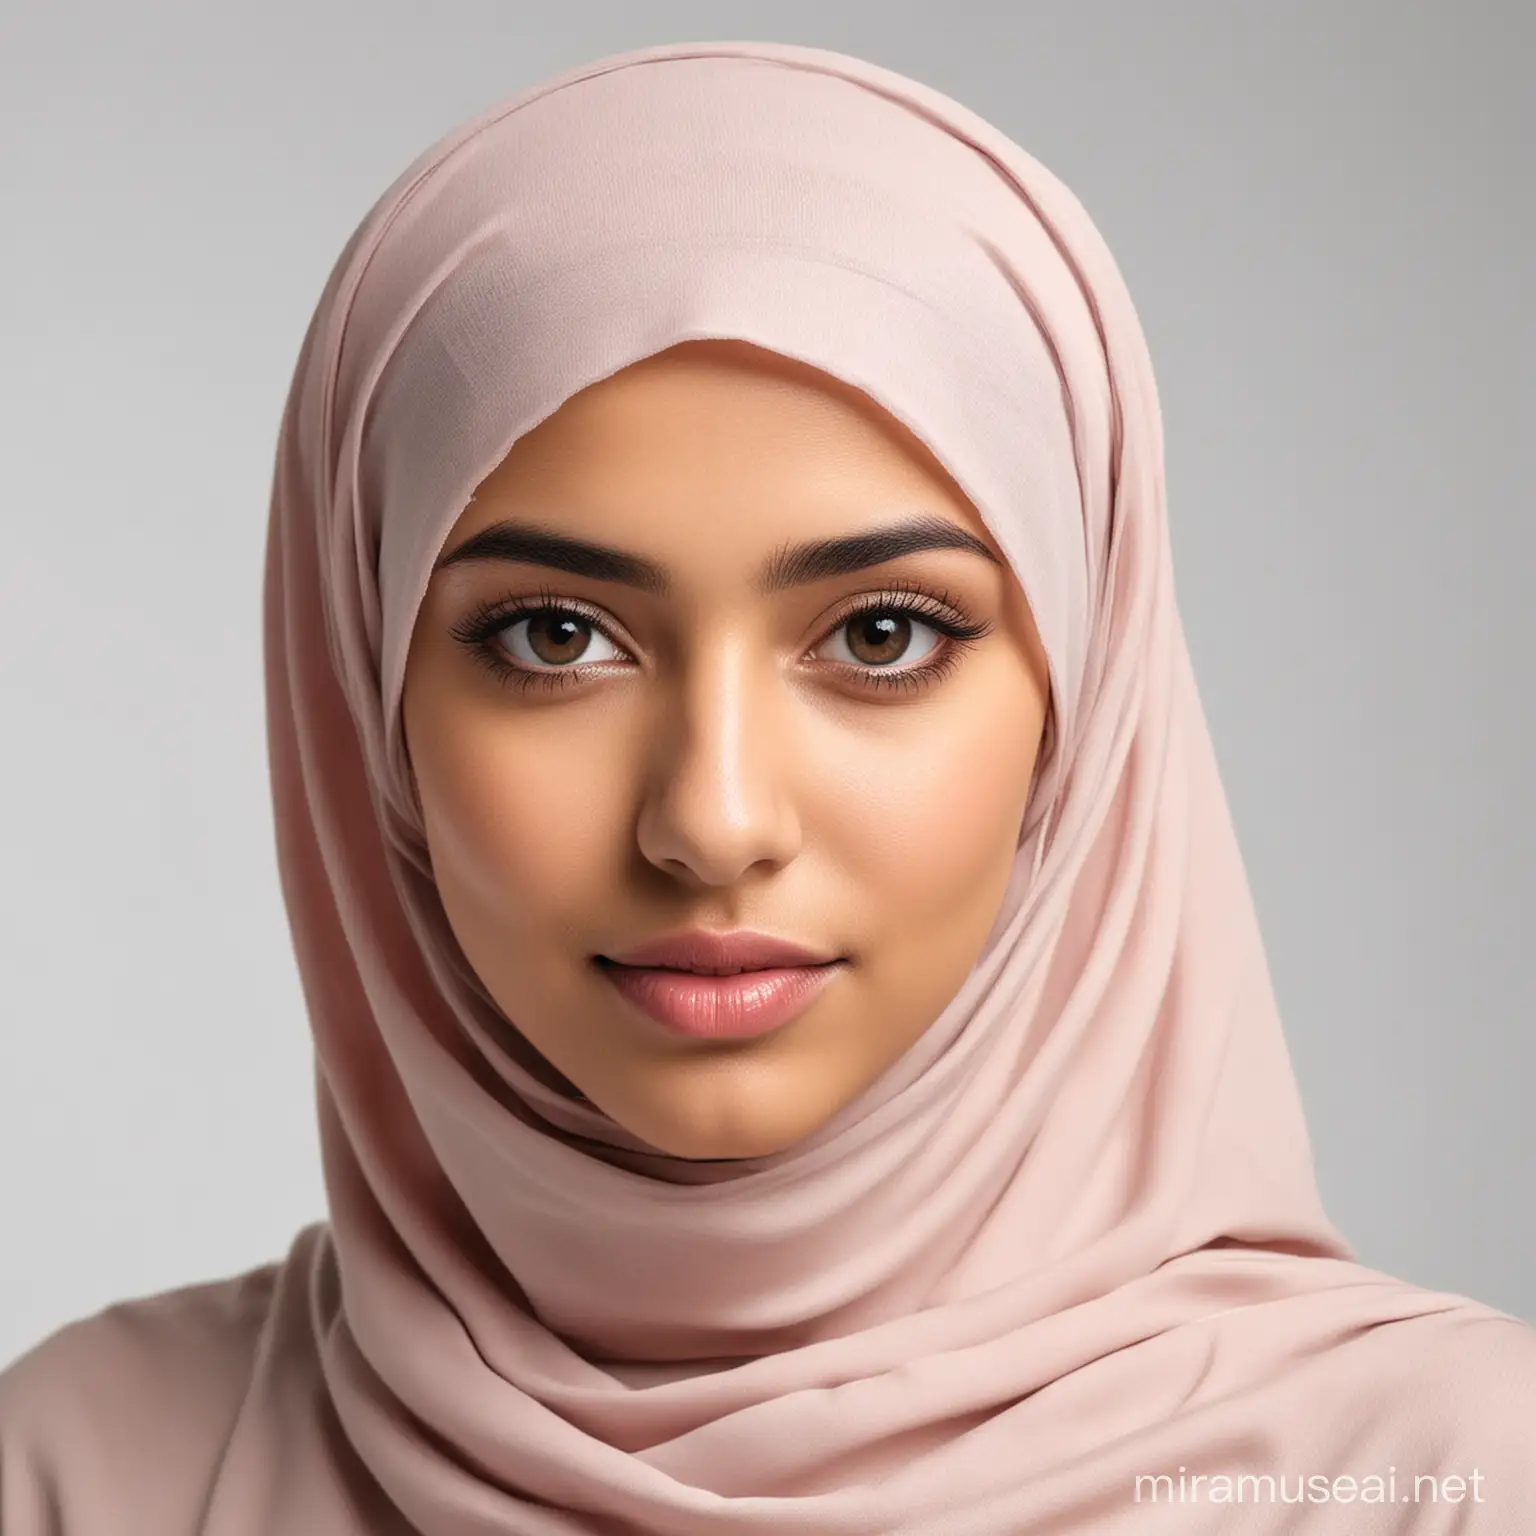 Modern Young Saudi Woman with hijab white background studio light hair must not be visible
